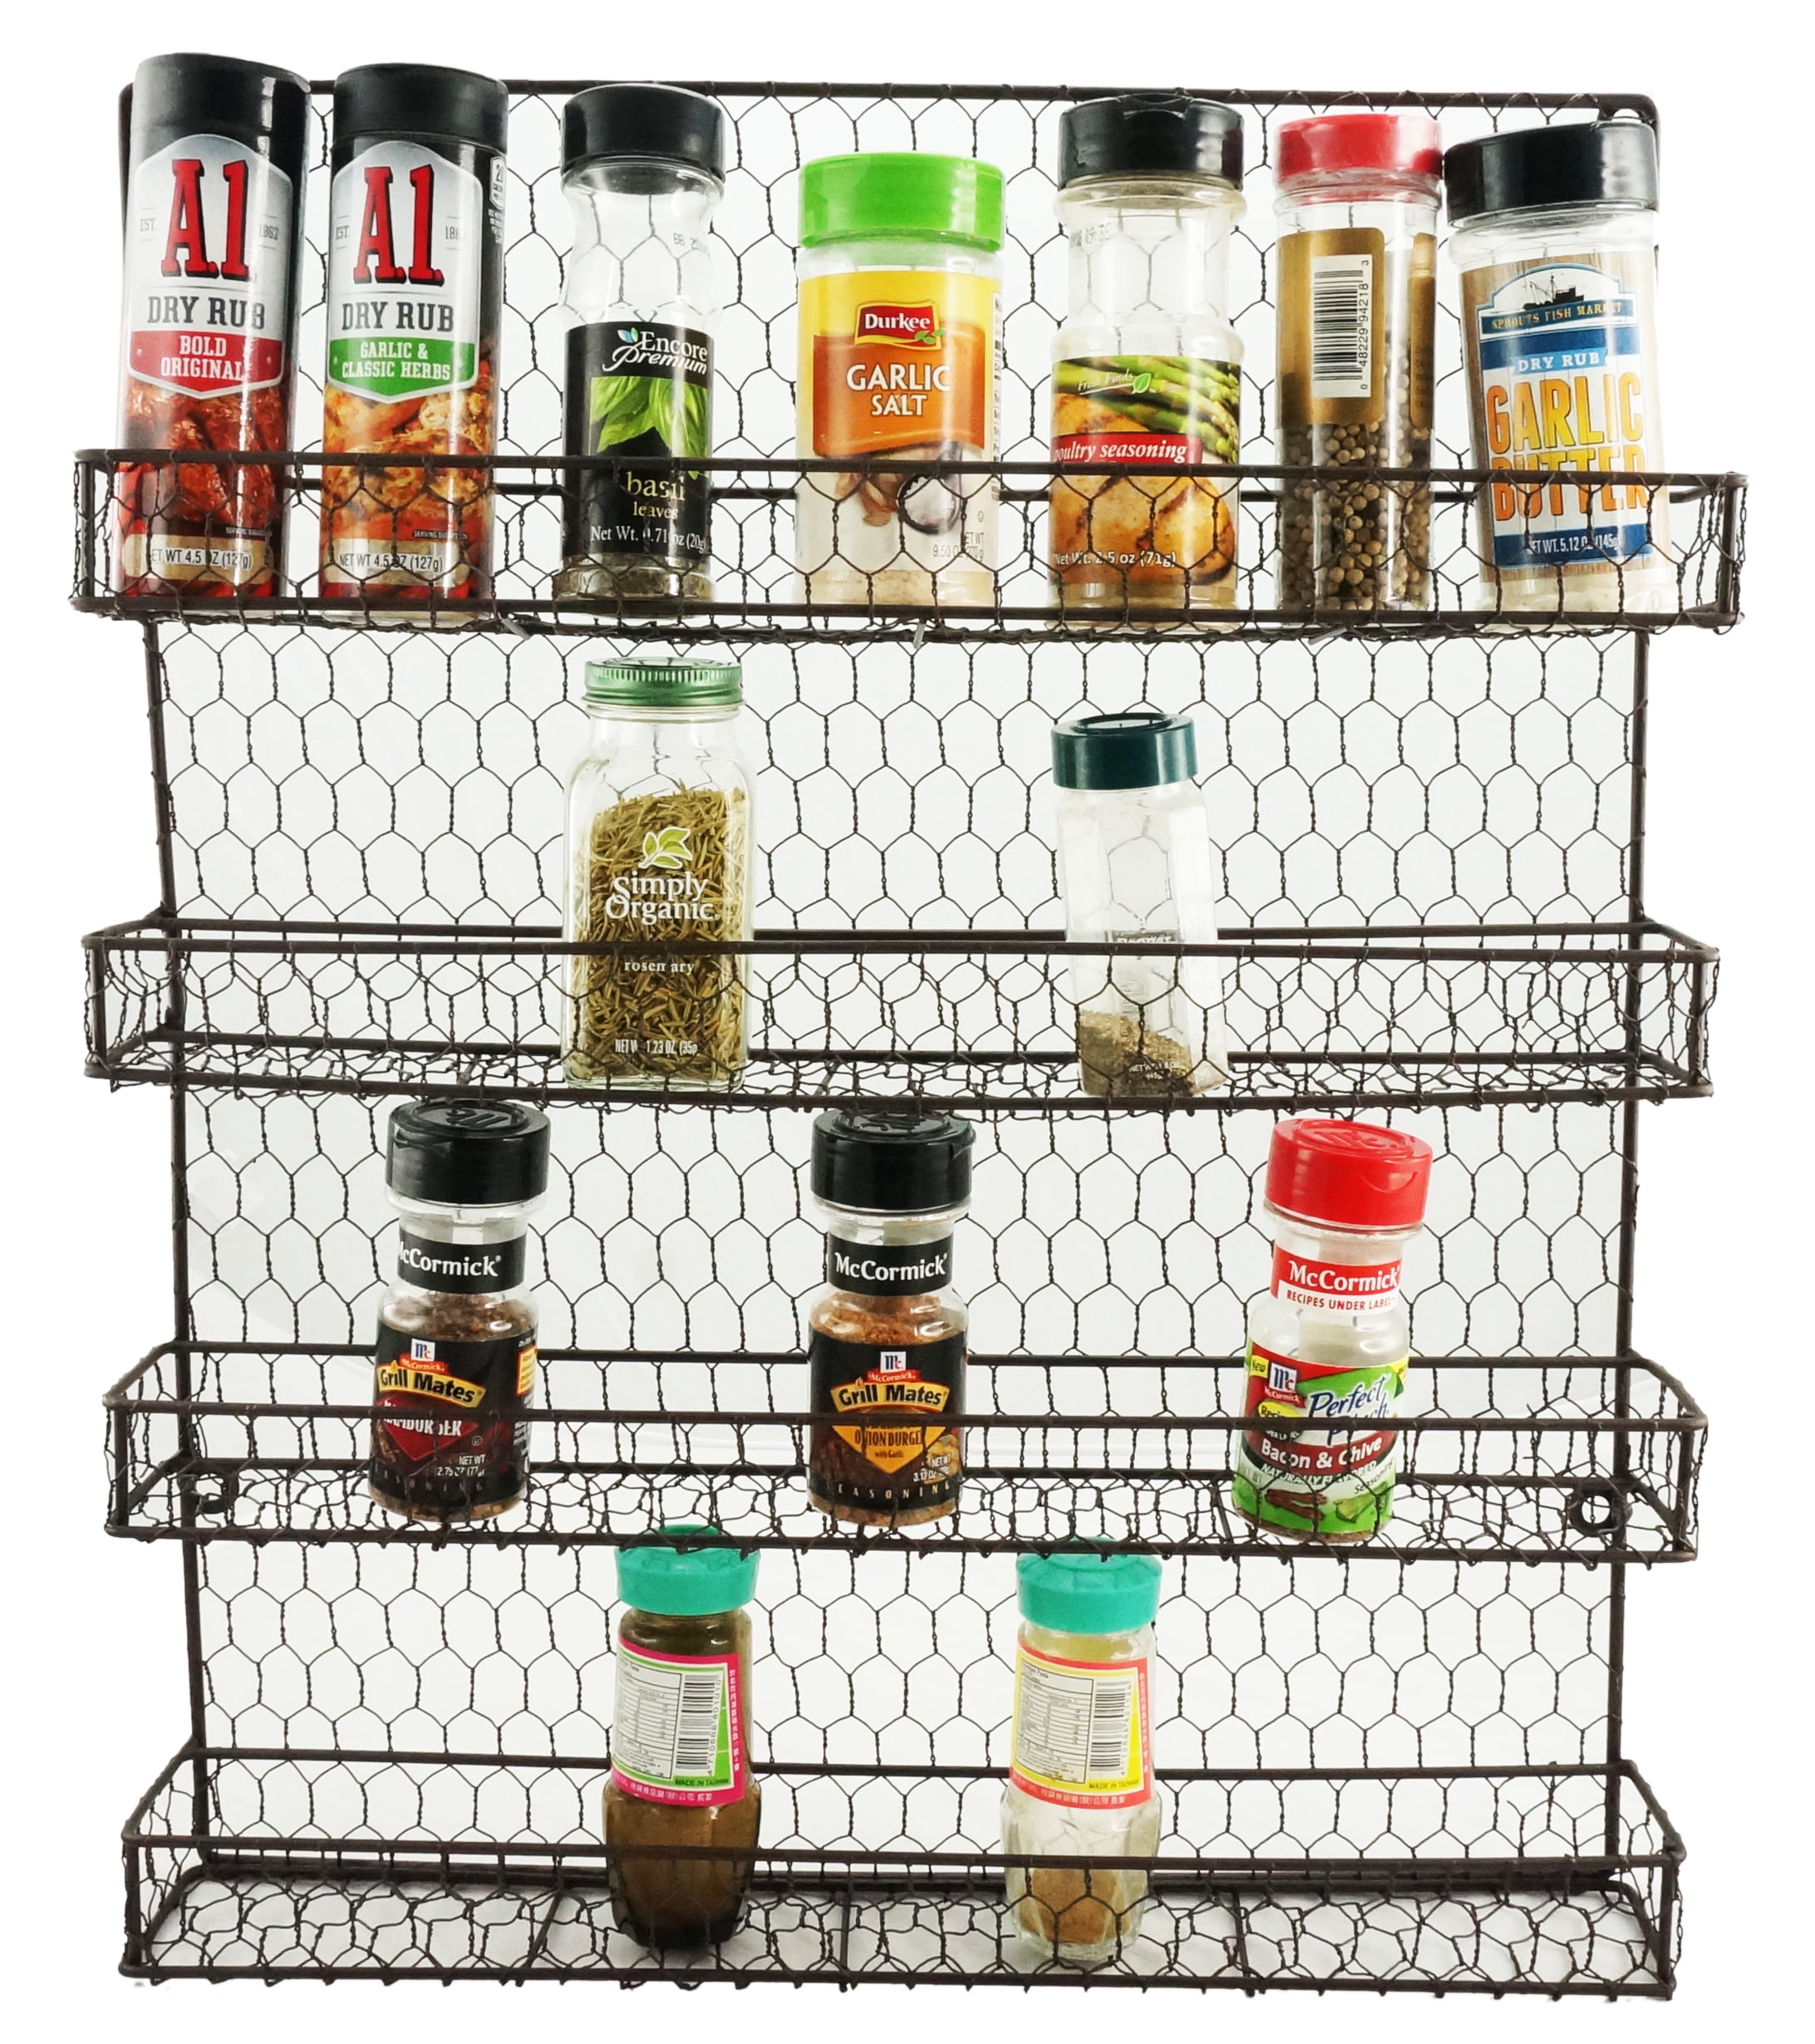 Herbs on Your Spice Rack May Be Loaded With Heavy Metals